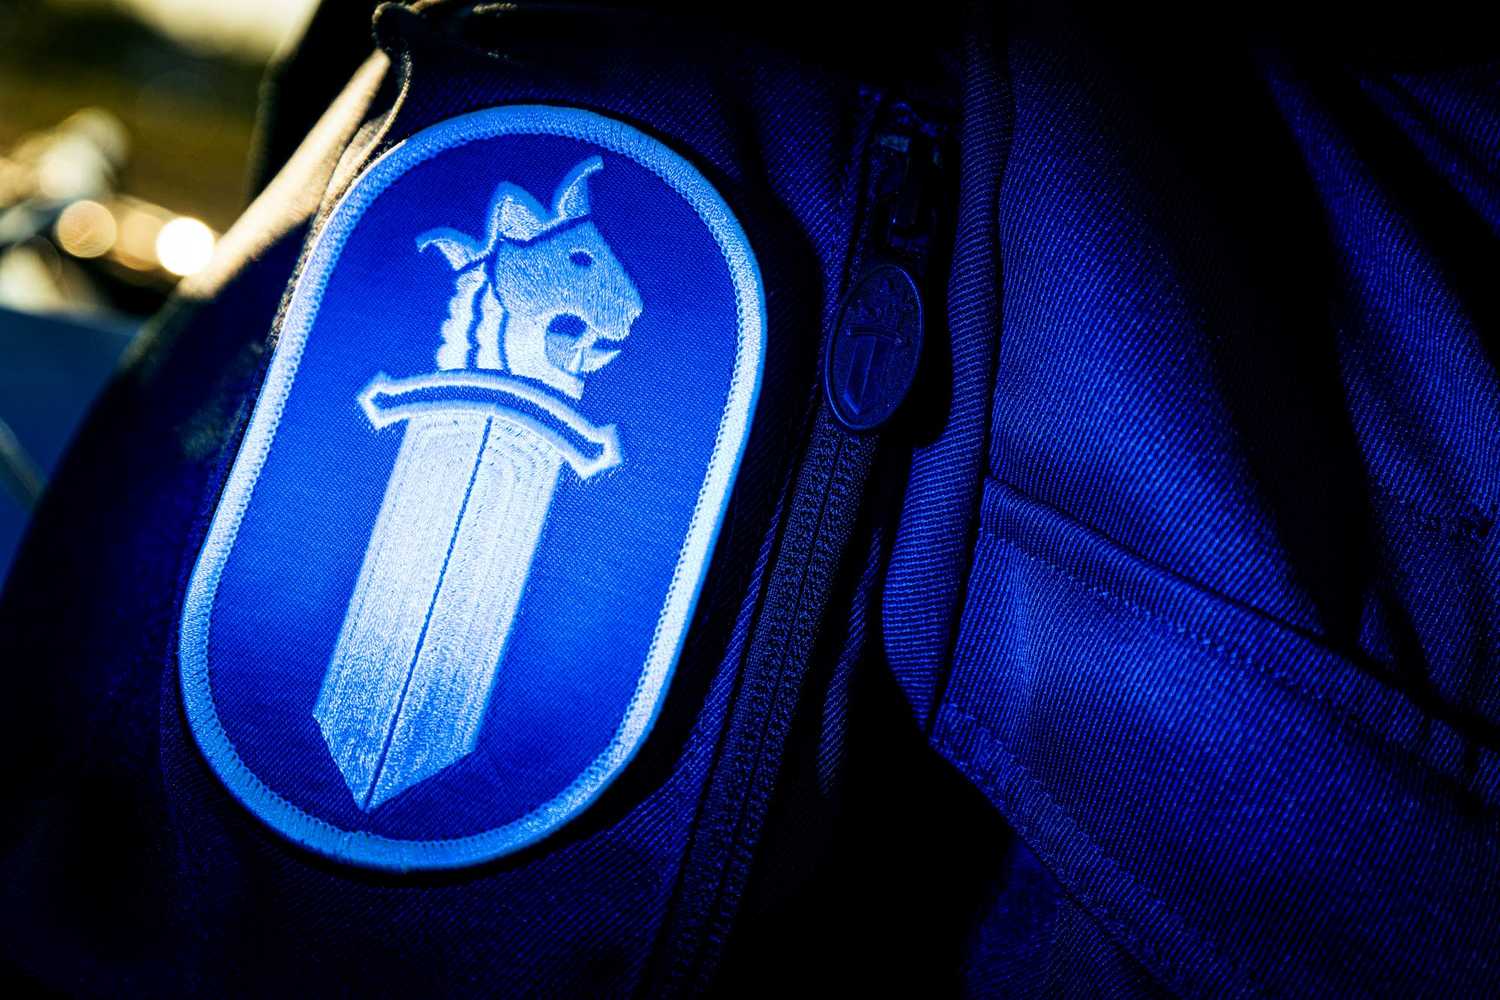 Blue and white Police sword-lion logo in the sleeve of the blue field uniform.